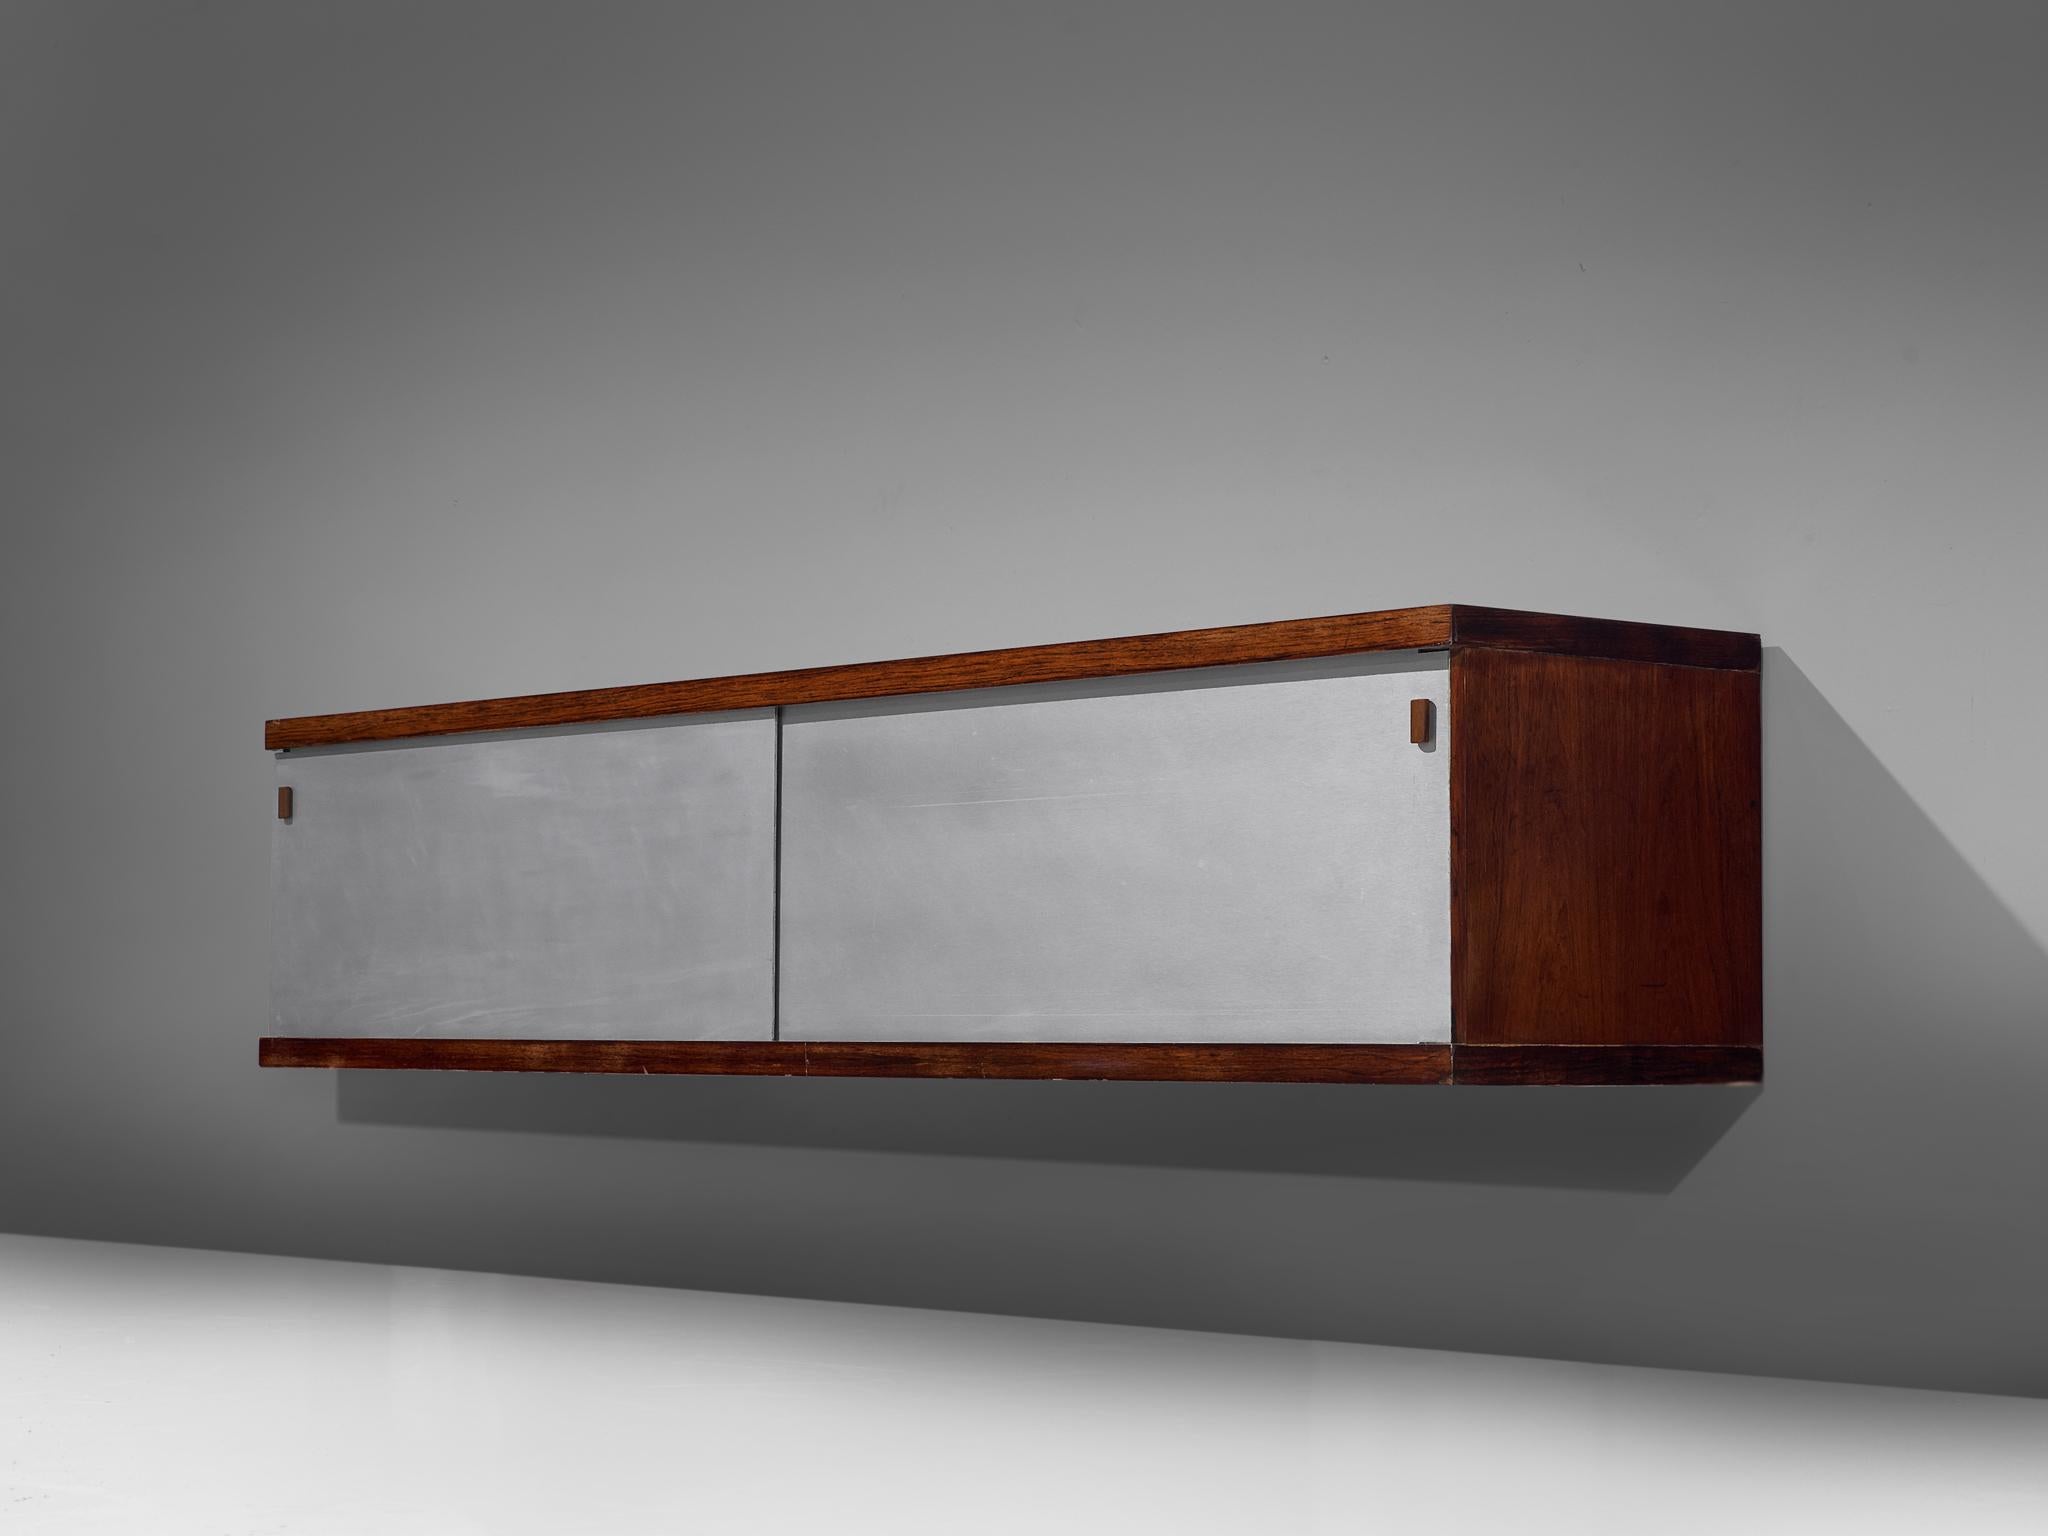 Horst Brüning for Behr, wall-mounted credenza, rosewood, aluminum and wood, Germany, 1960.

This simplistic geometric credenza holds a rosewood case and a brushed metal frame. The sliding doors are made of grey formica and have geometric grips.